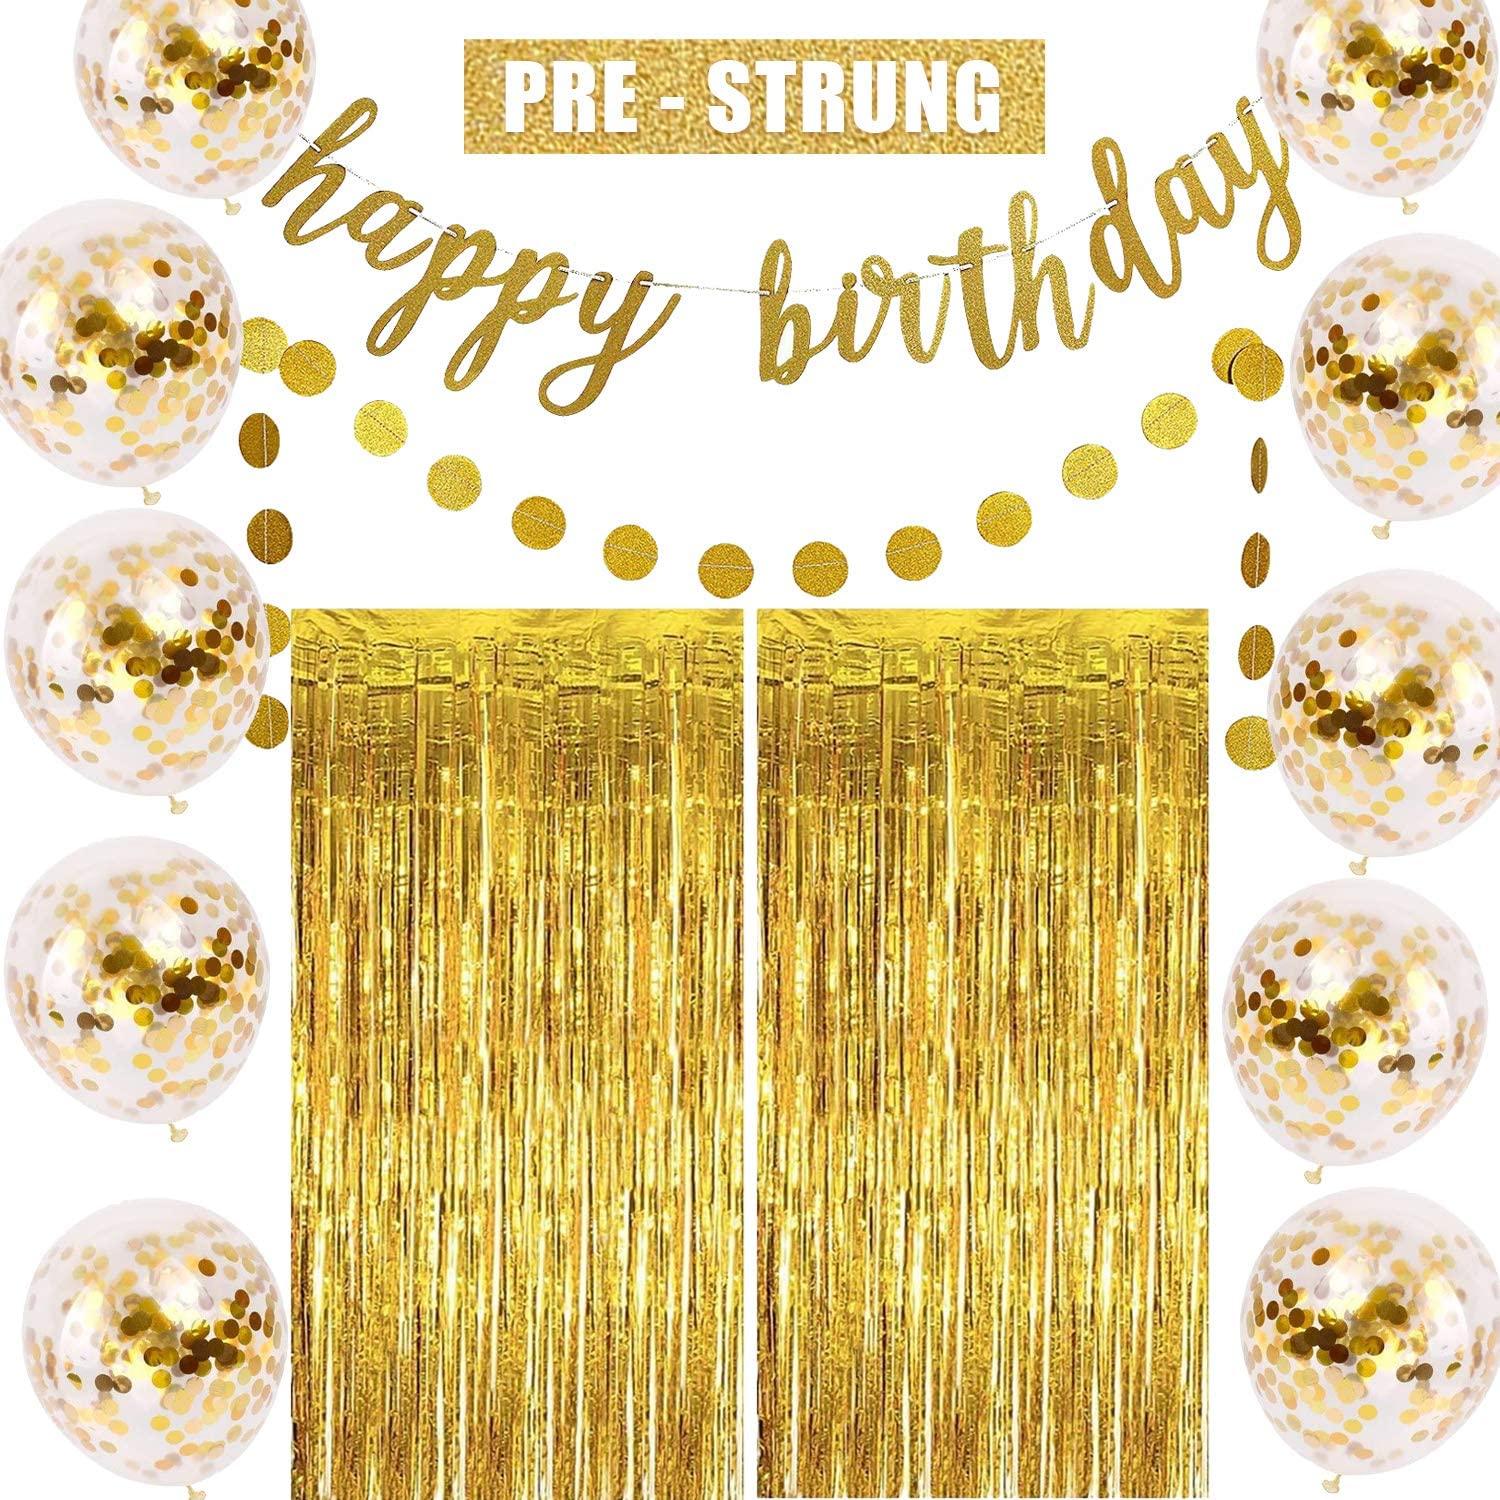 Gold Birthday Party Decorations Set - Gold Glitter Happy Birthday Banner, Circle Dots Garland, Gold Confetti Balloons - If you say i do